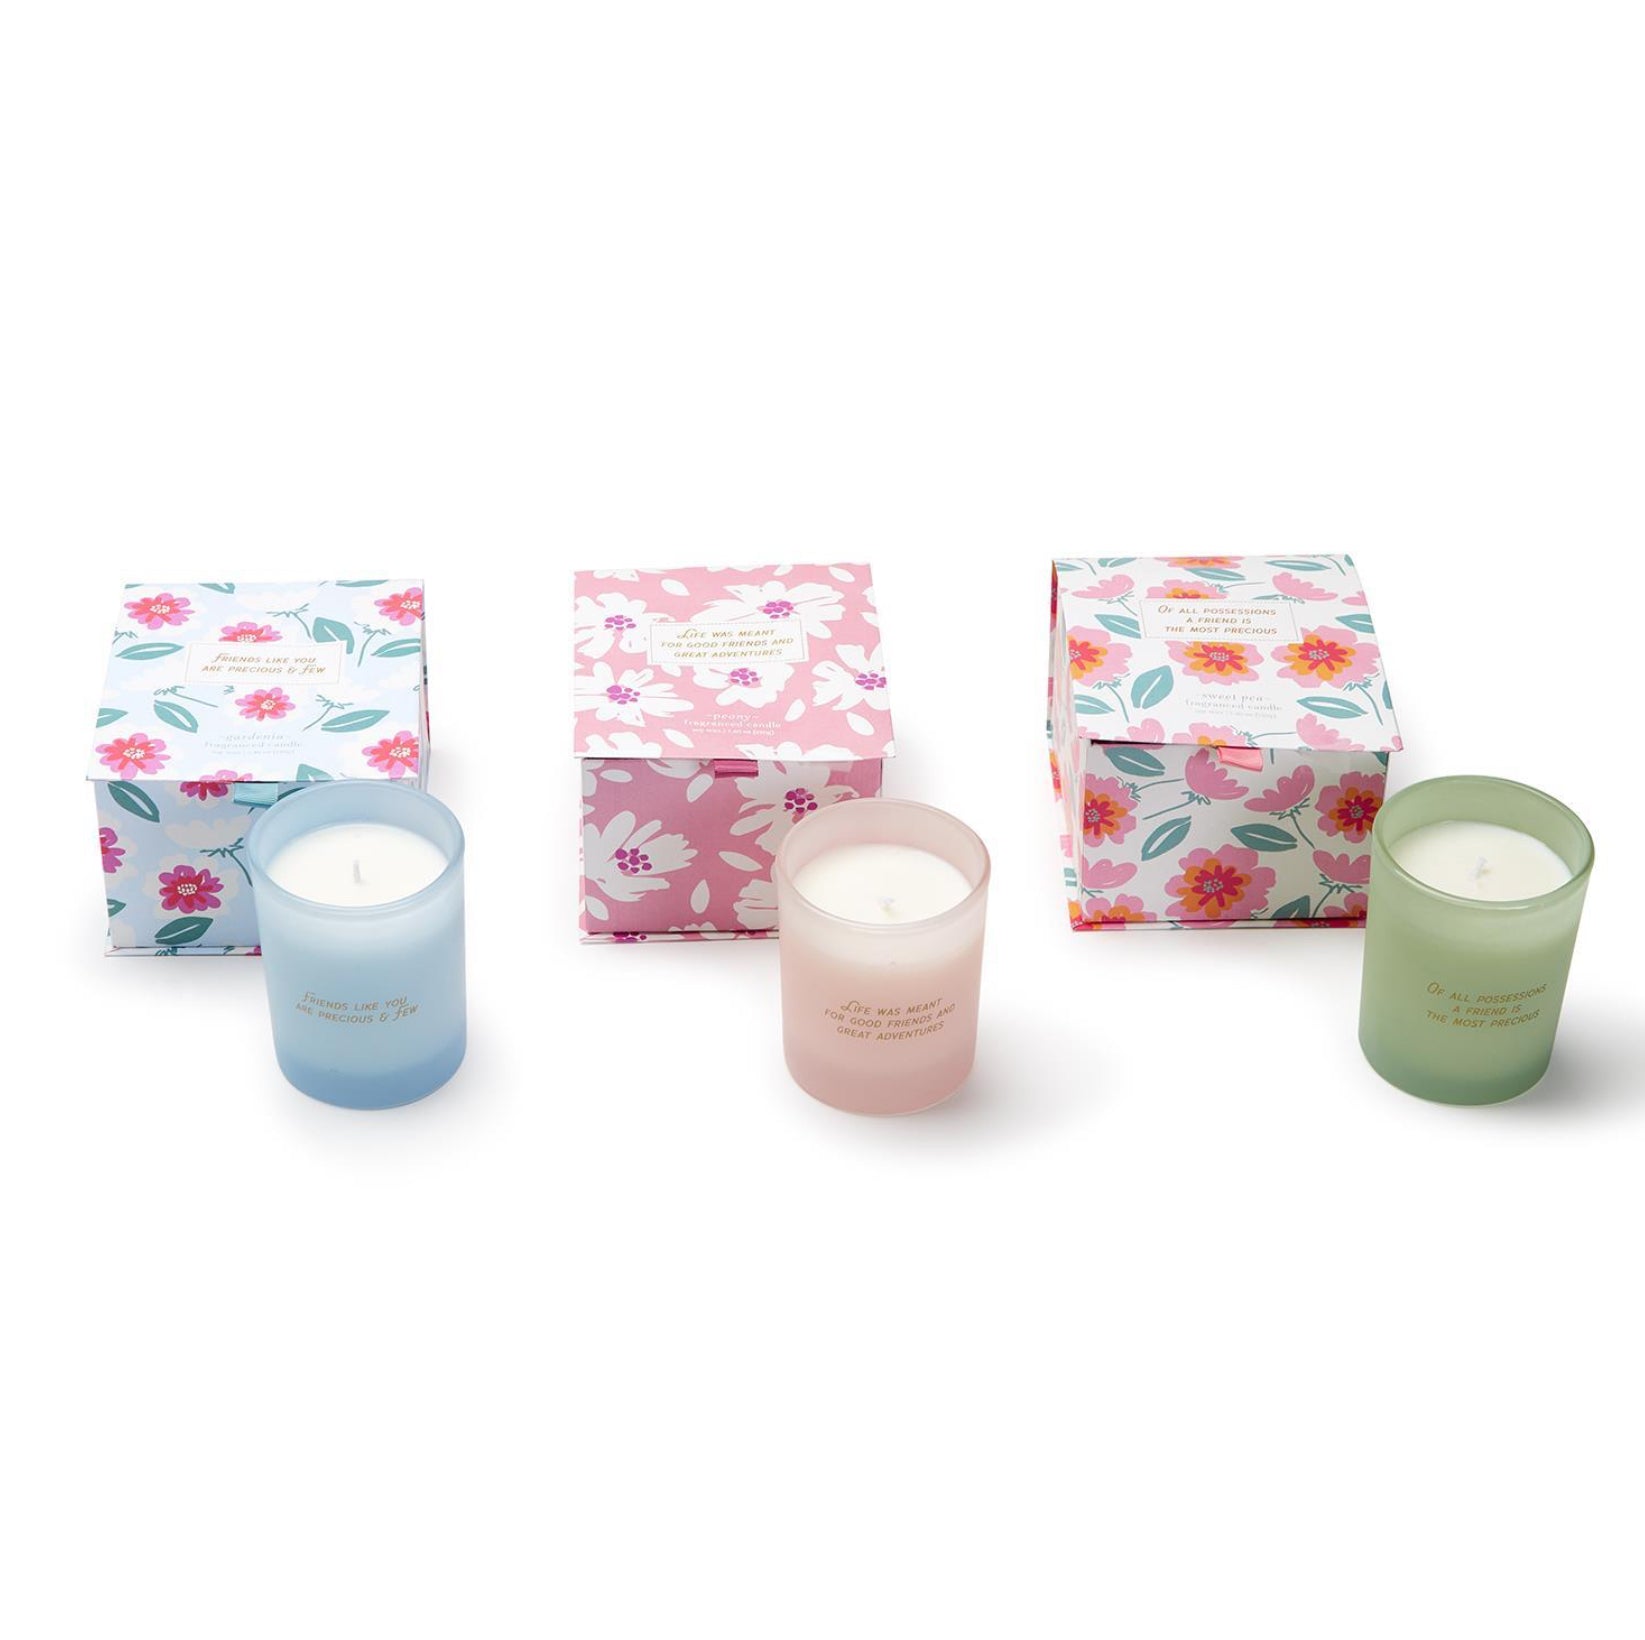 Friendship Gift Box Candle- Assorted